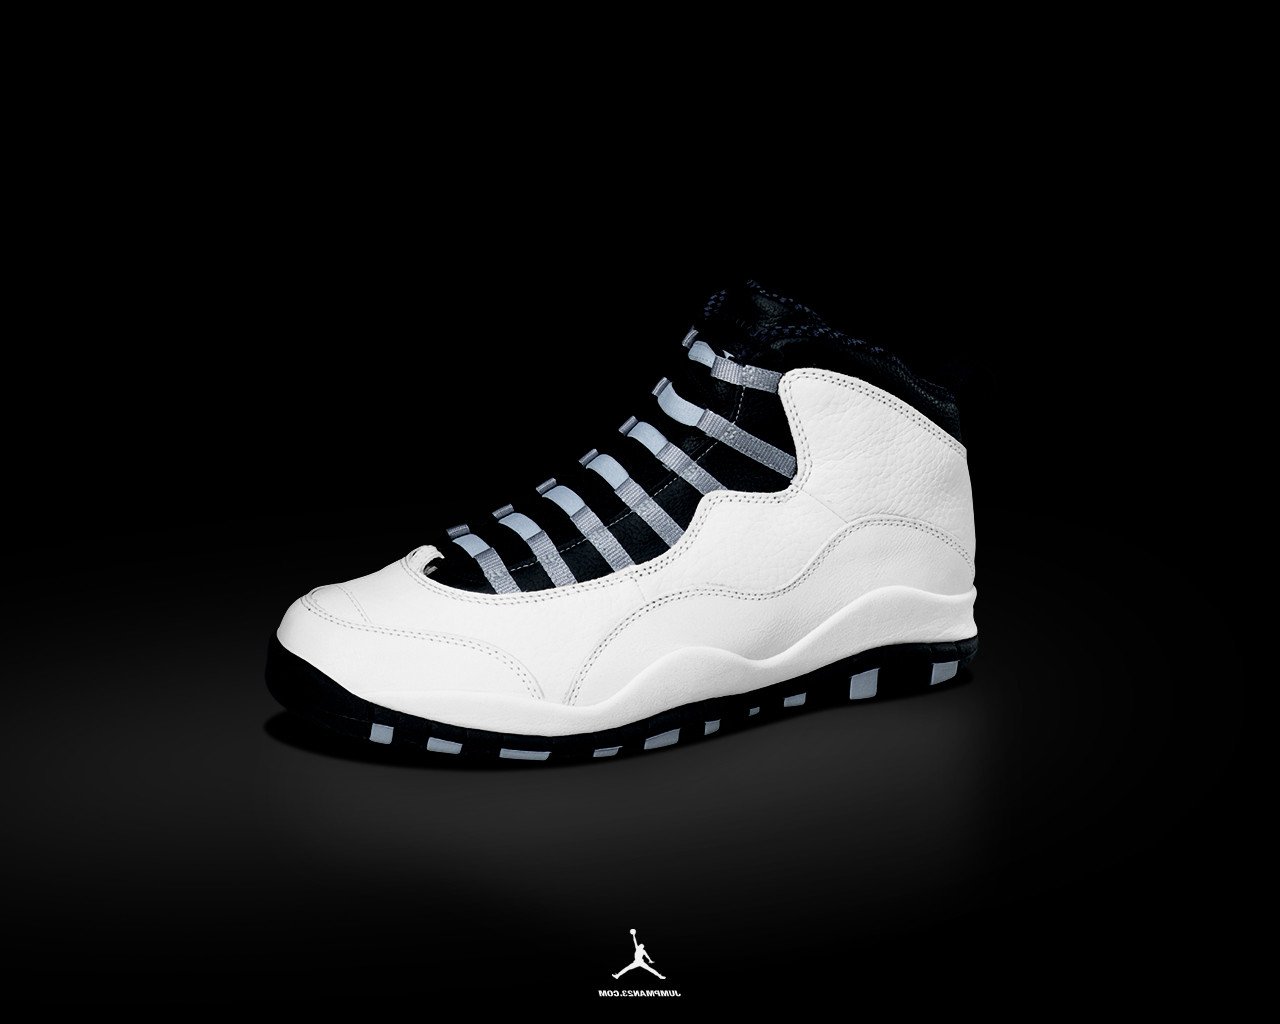 Download Jordan 11 Wallpaper in high resolution for free All you